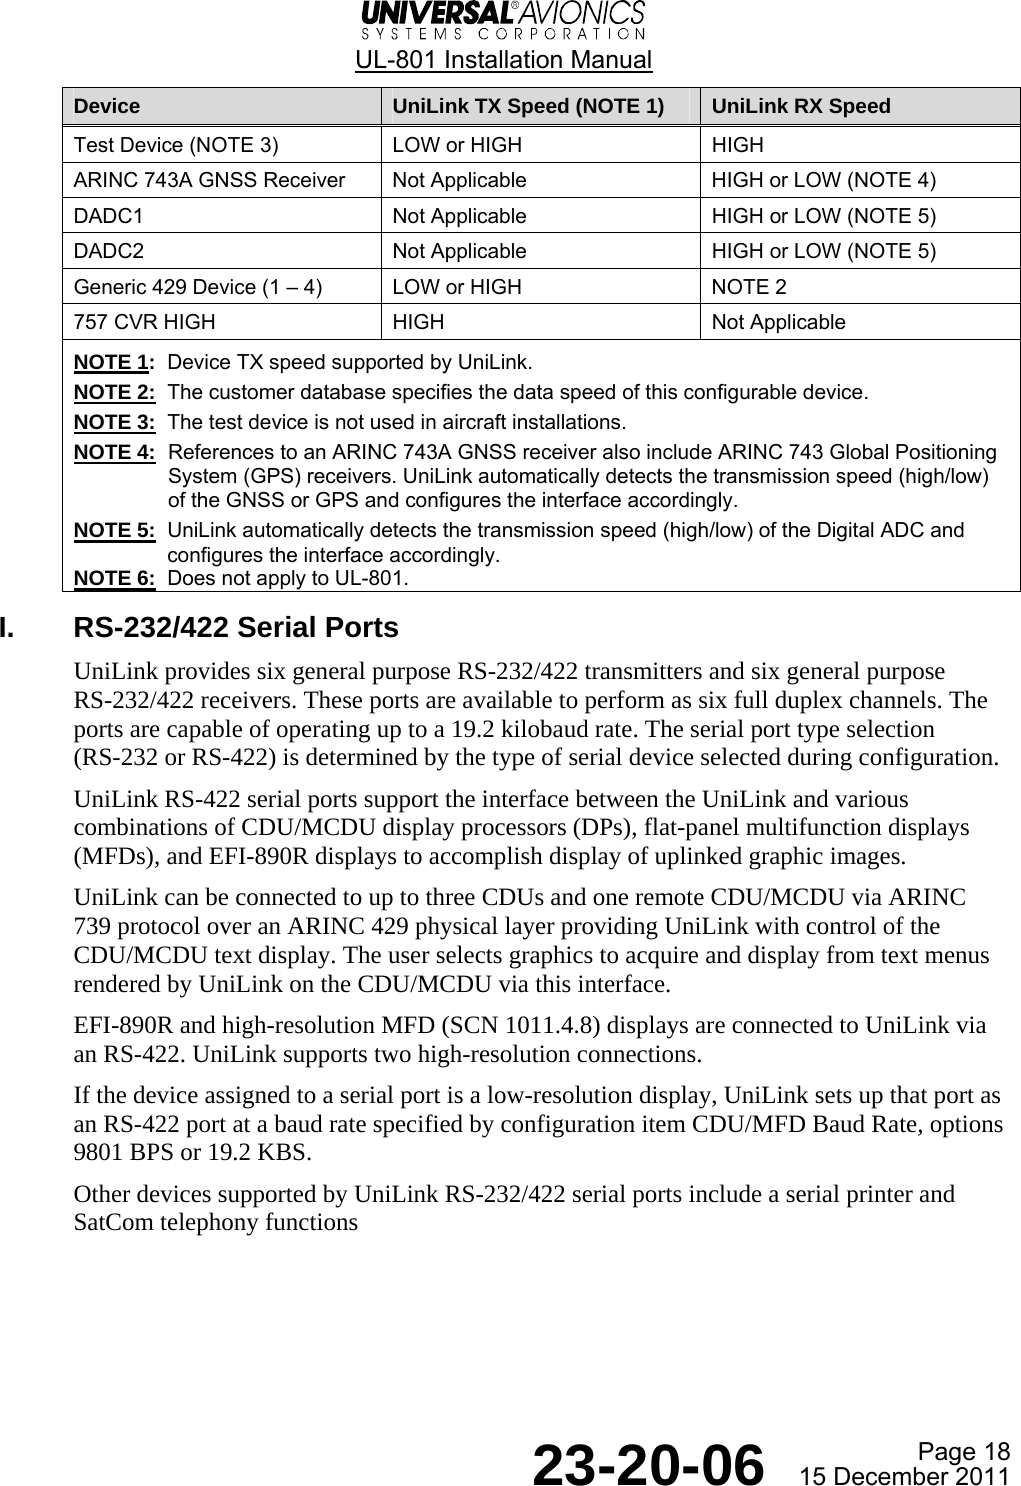  UL-801 Installation Manual  Page 18  23-20-06  15 December 2011 Device  UniLink TX Speed (NOTE 1)  UniLink RX Speed Test Device (NOTE 3)  LOW or HIGH  HIGH ARINC 743A GNSS Receiver  Not Applicable  HIGH or LOW (NOTE 4) DADC1   Not Applicable  HIGH or LOW (NOTE 5) DADC2  Not Applicable  HIGH or LOW (NOTE 5) Generic 429 Device (1 – 4)  LOW or HIGH  NOTE 2 757 CVR HIGH  HIGH  Not Applicable NOTE 1:  Device TX speed supported by UniLink. NOTE 2:  The customer database specifies the data speed of this configurable device. NOTE 3:  The test device is not used in aircraft installations. NOTE 4:  References to an ARINC 743A GNSS receiver also include ARINC 743 Global Positioning System (GPS) receivers. UniLink automatically detects the transmission speed (high/low) of the GNSS or GPS and configures the interface accordingly. NOTE 5:  UniLink automatically detects the transmission speed (high/low) of the Digital ADC and configures the interface accordingly. NOTE 6:  Does not apply to UL-801. I.  RS-232/422 Serial Ports UniLink provides six general purpose RS-232/422 transmitters and six general purpose RS-232/422 receivers. These ports are available to perform as six full duplex channels. The ports are capable of operating up to a 19.2 kilobaud rate. The serial port type selection (RS-232 or RS-422) is determined by the type of serial device selected during configuration. UniLink RS-422 serial ports support the interface between the UniLink and various combinations of CDU/MCDU display processors (DPs), flat-panel multifunction displays (MFDs), and EFI-890R displays to accomplish display of uplinked graphic images. UniLink can be connected to up to three CDUs and one remote CDU/MCDU via ARINC 739 protocol over an ARINC 429 physical layer providing UniLink with control of the CDU/MCDU text display. The user selects graphics to acquire and display from text menus rendered by UniLink on the CDU/MCDU via this interface. EFI-890R and high-resolution MFD (SCN 1011.4.8) displays are connected to UniLink via an RS-422. UniLink supports two high-resolution connections. If the device assigned to a serial port is a low-resolution display, UniLink sets up that port as an RS-422 port at a baud rate specified by configuration item CDU/MFD Baud Rate, options 9801 BPS or 19.2 KBS. Other devices supported by UniLink RS-232/422 serial ports include a serial printer and SatCom telephony functions   